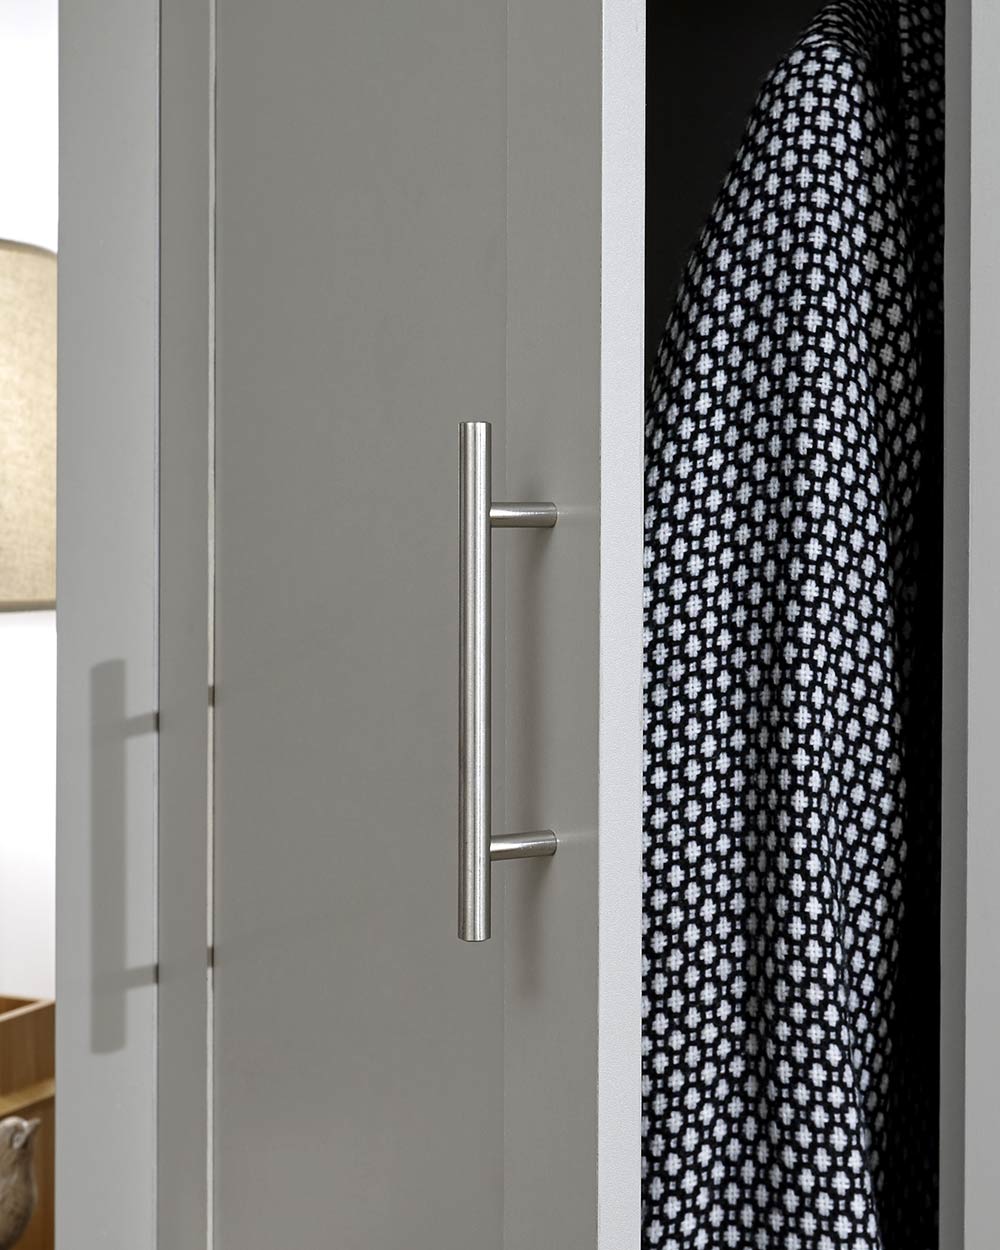 Lancaster 2 Door 2 Drawer wardrobe in sleek grey with an oak effect top in a bedroom setting close up of the modern handles